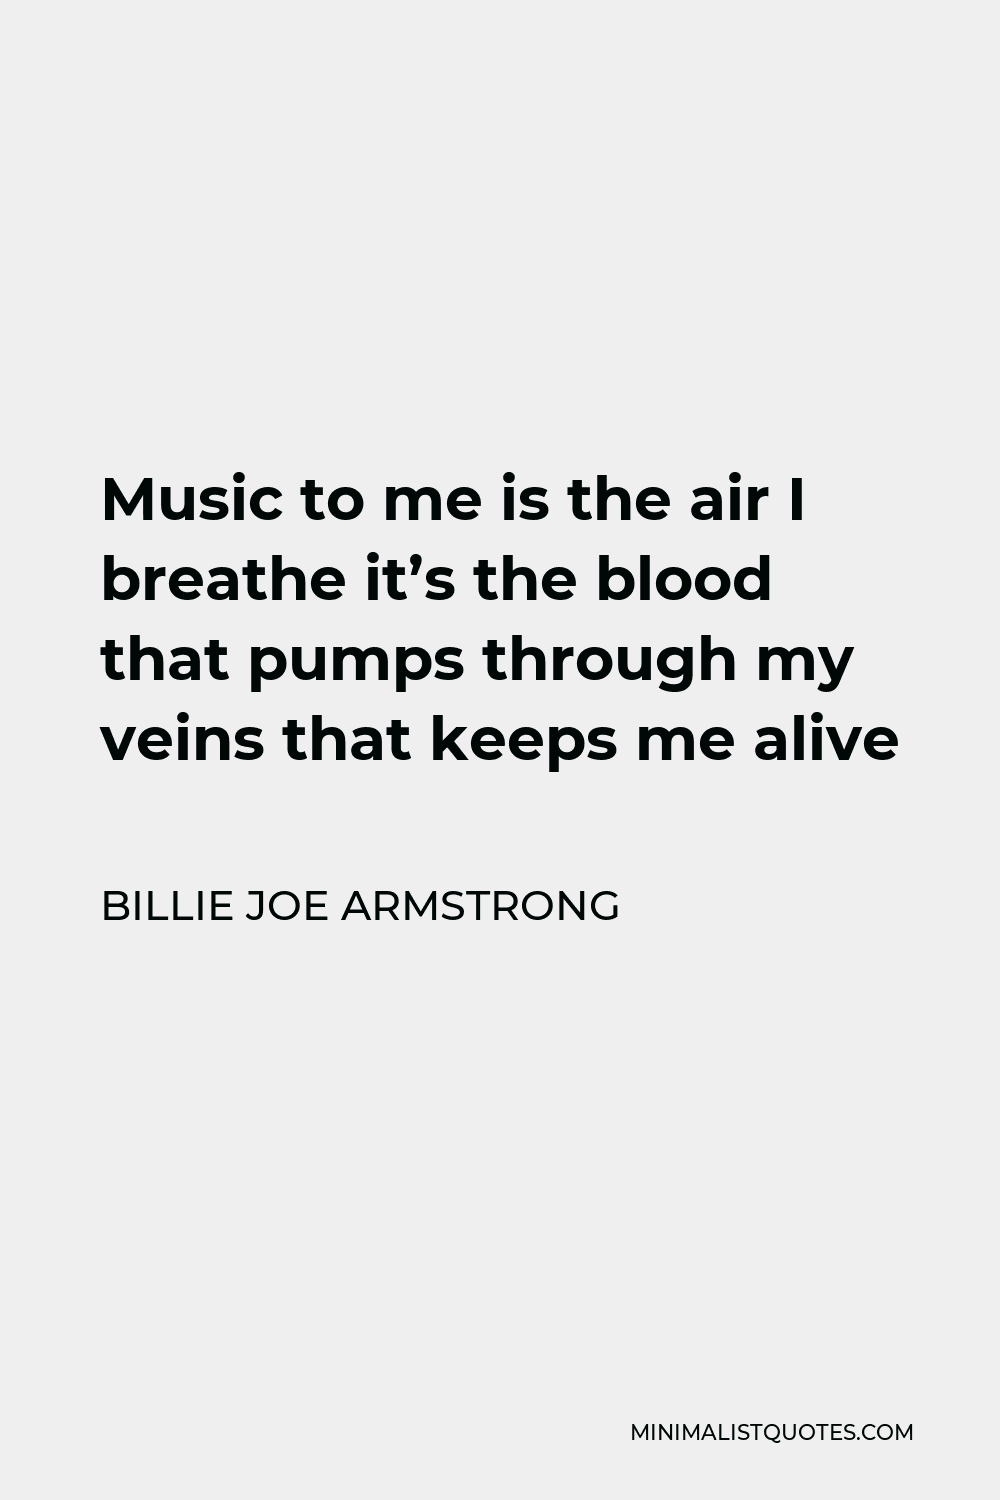 Billie Joe Armstrong Quote - Music to me is the air I breathe it’s the blood that pumps through my veins that keeps me alive